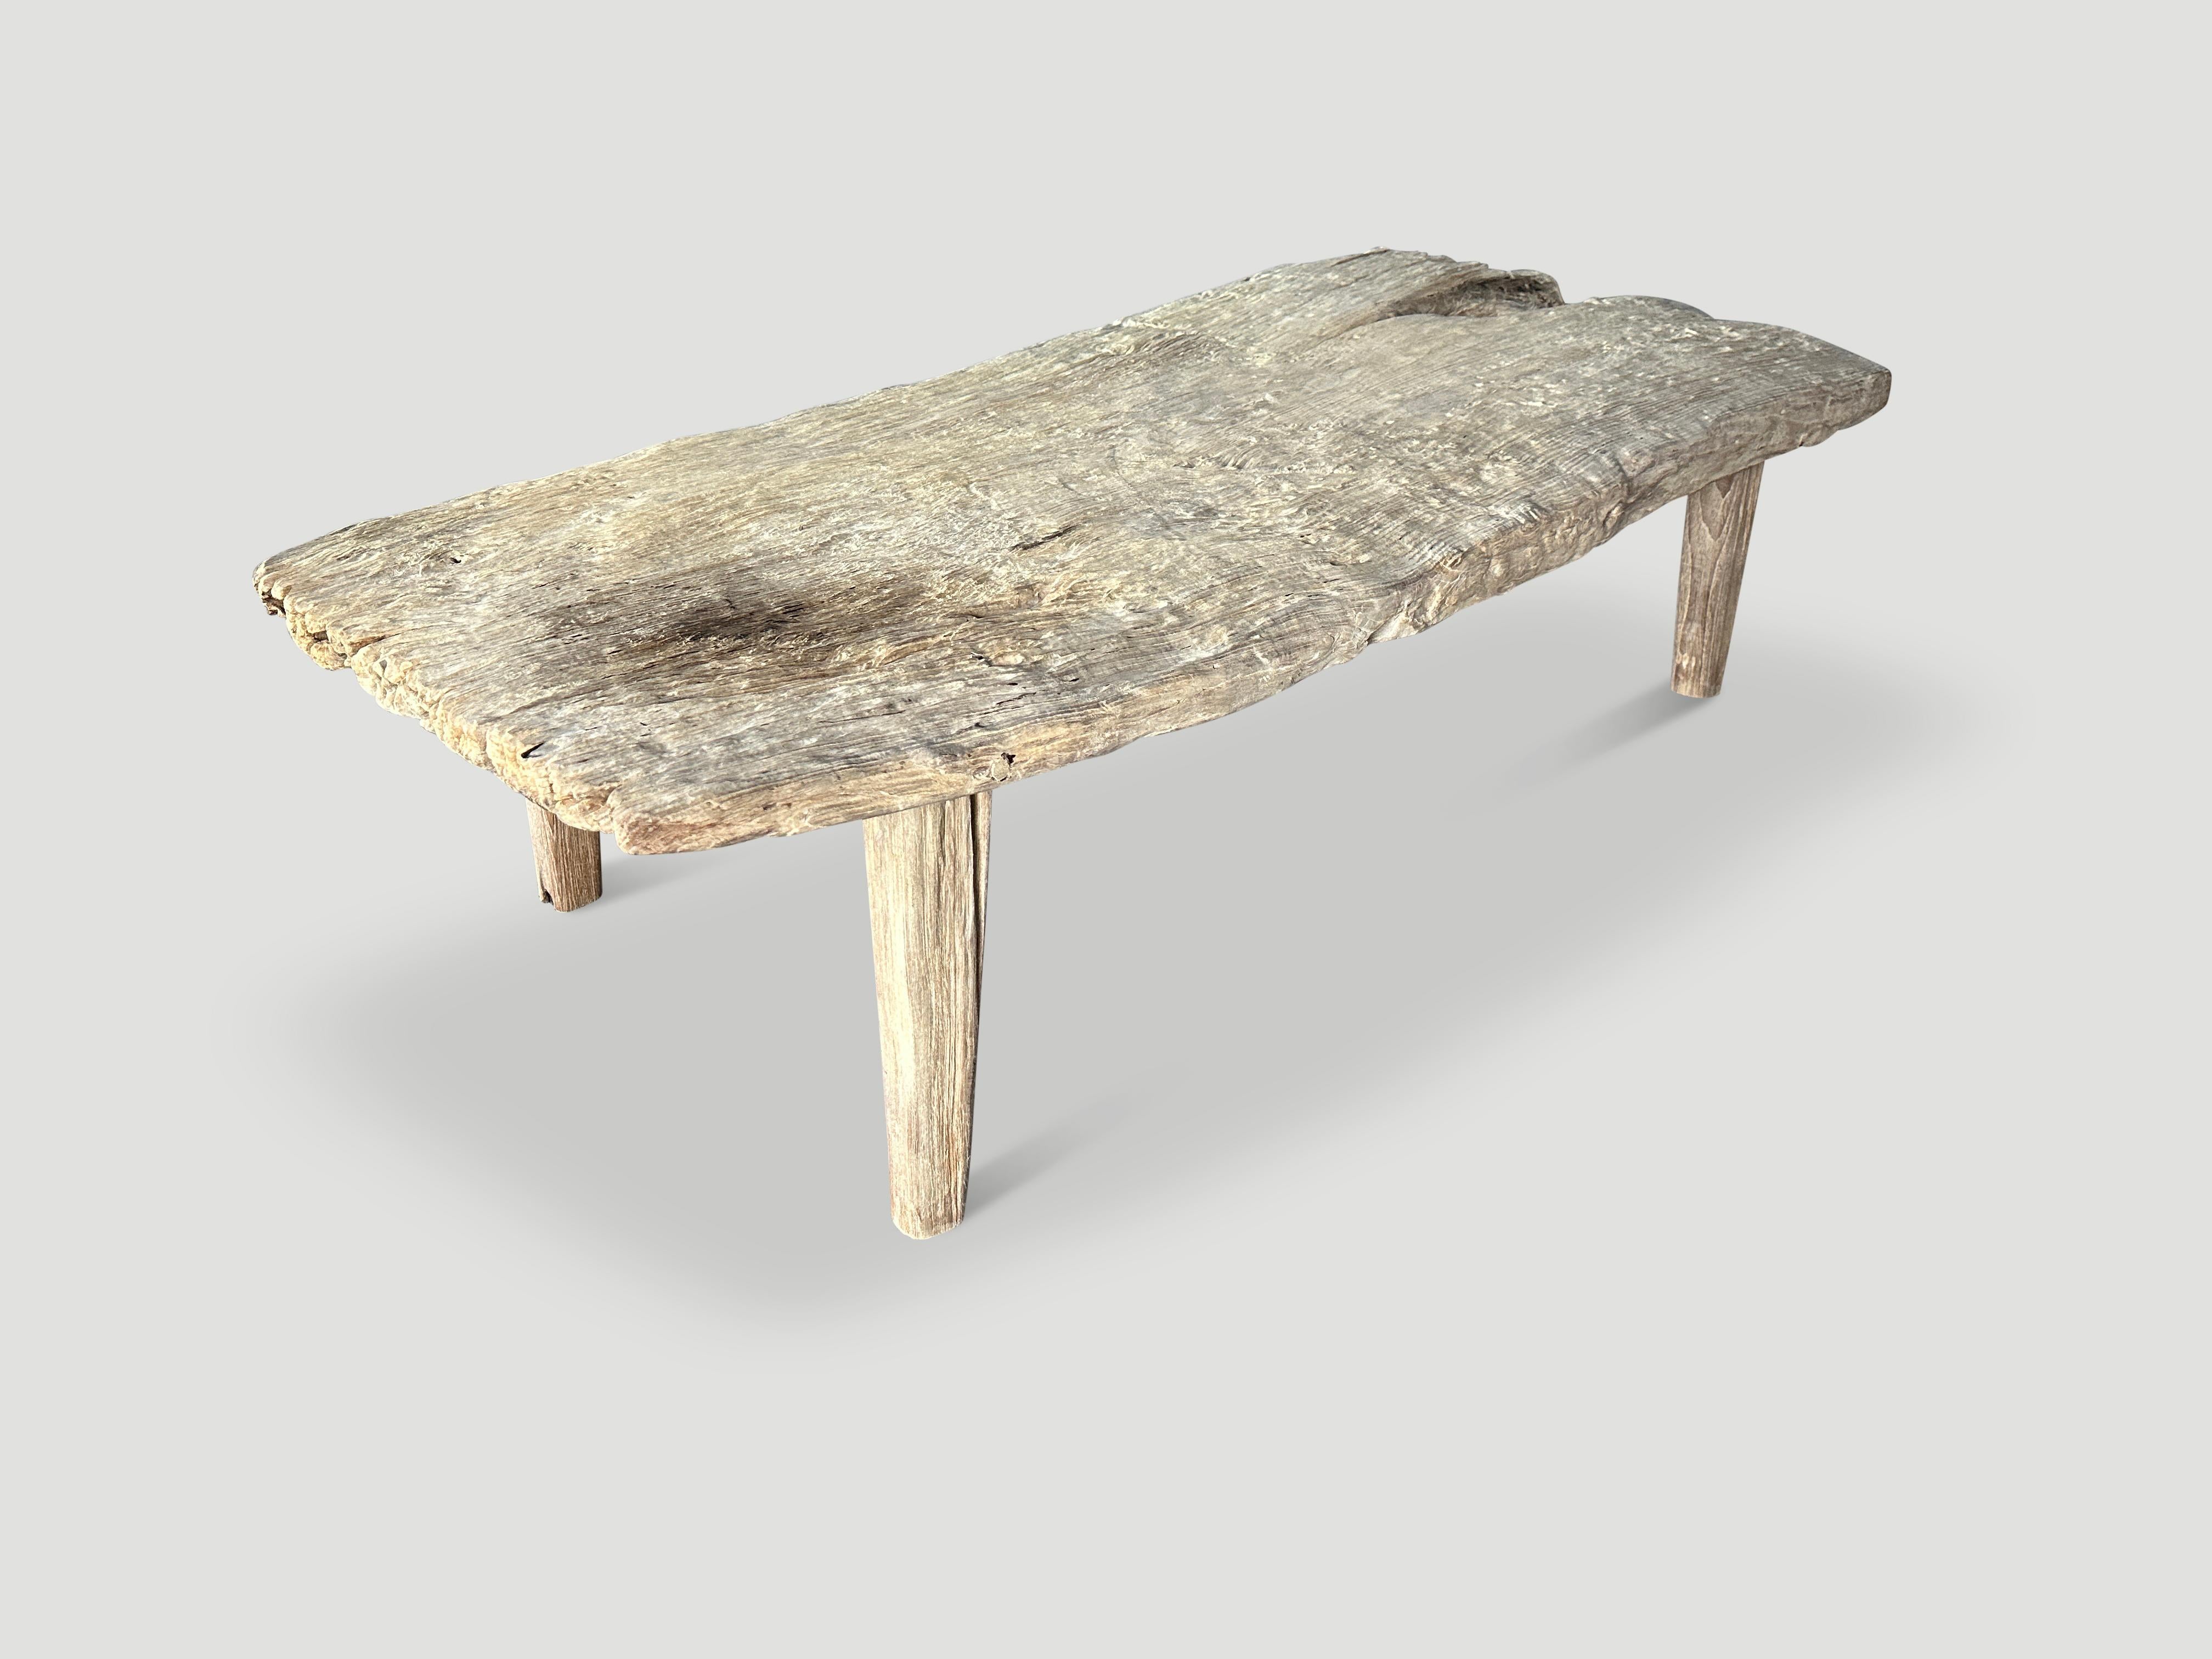 Andrianna Shamaris Wabi Sabi Teak Wood Coffee Table In Excellent Condition For Sale In New York, NY